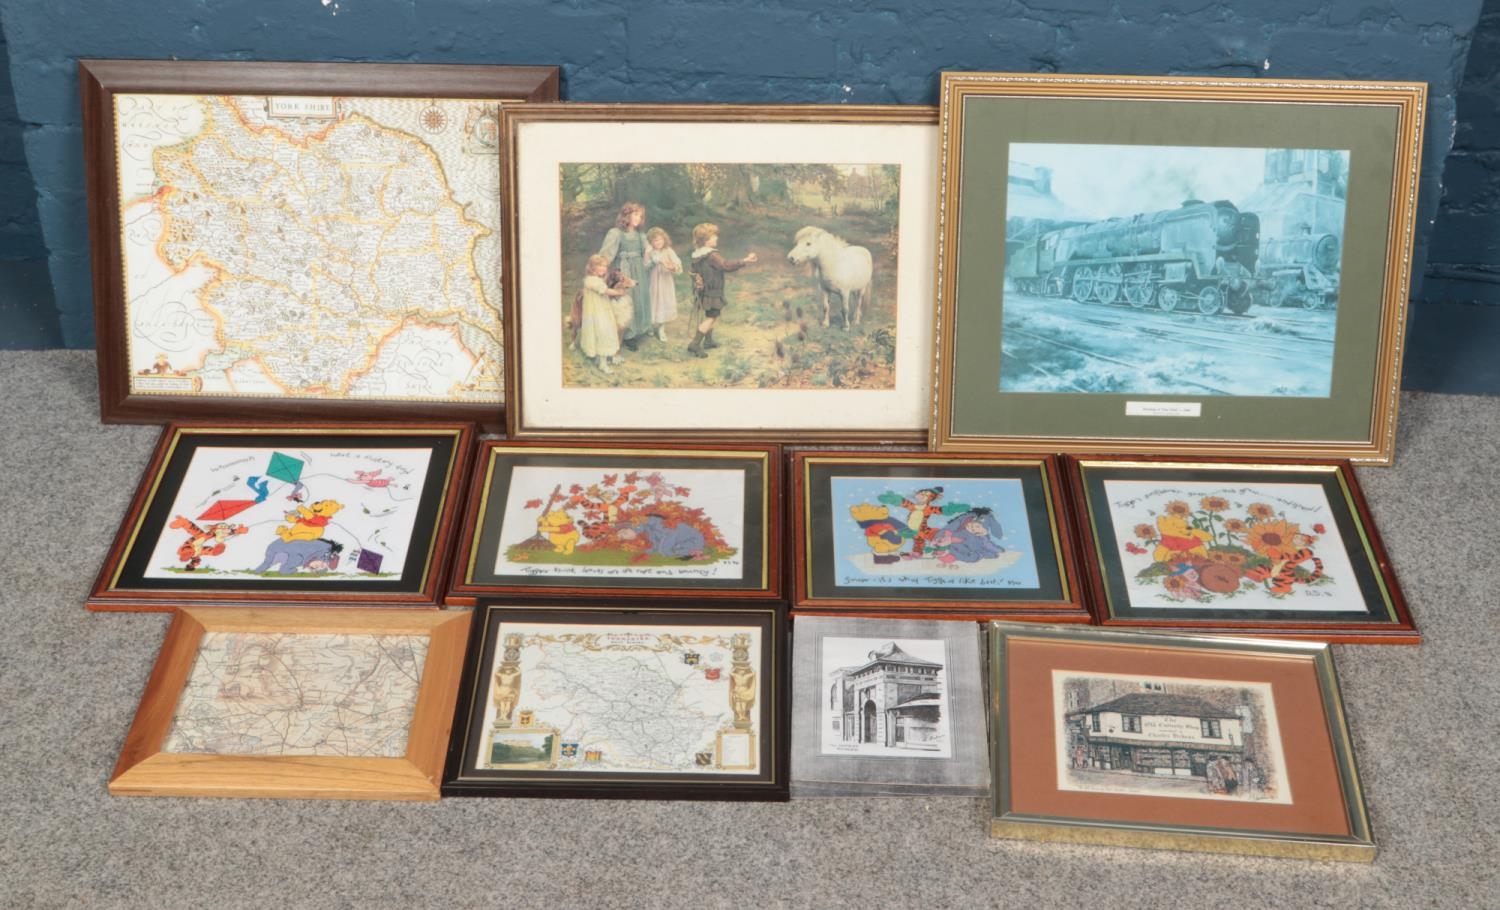 A collection of printed maps, prints and Winnie-the-Pooh cross-stitches.